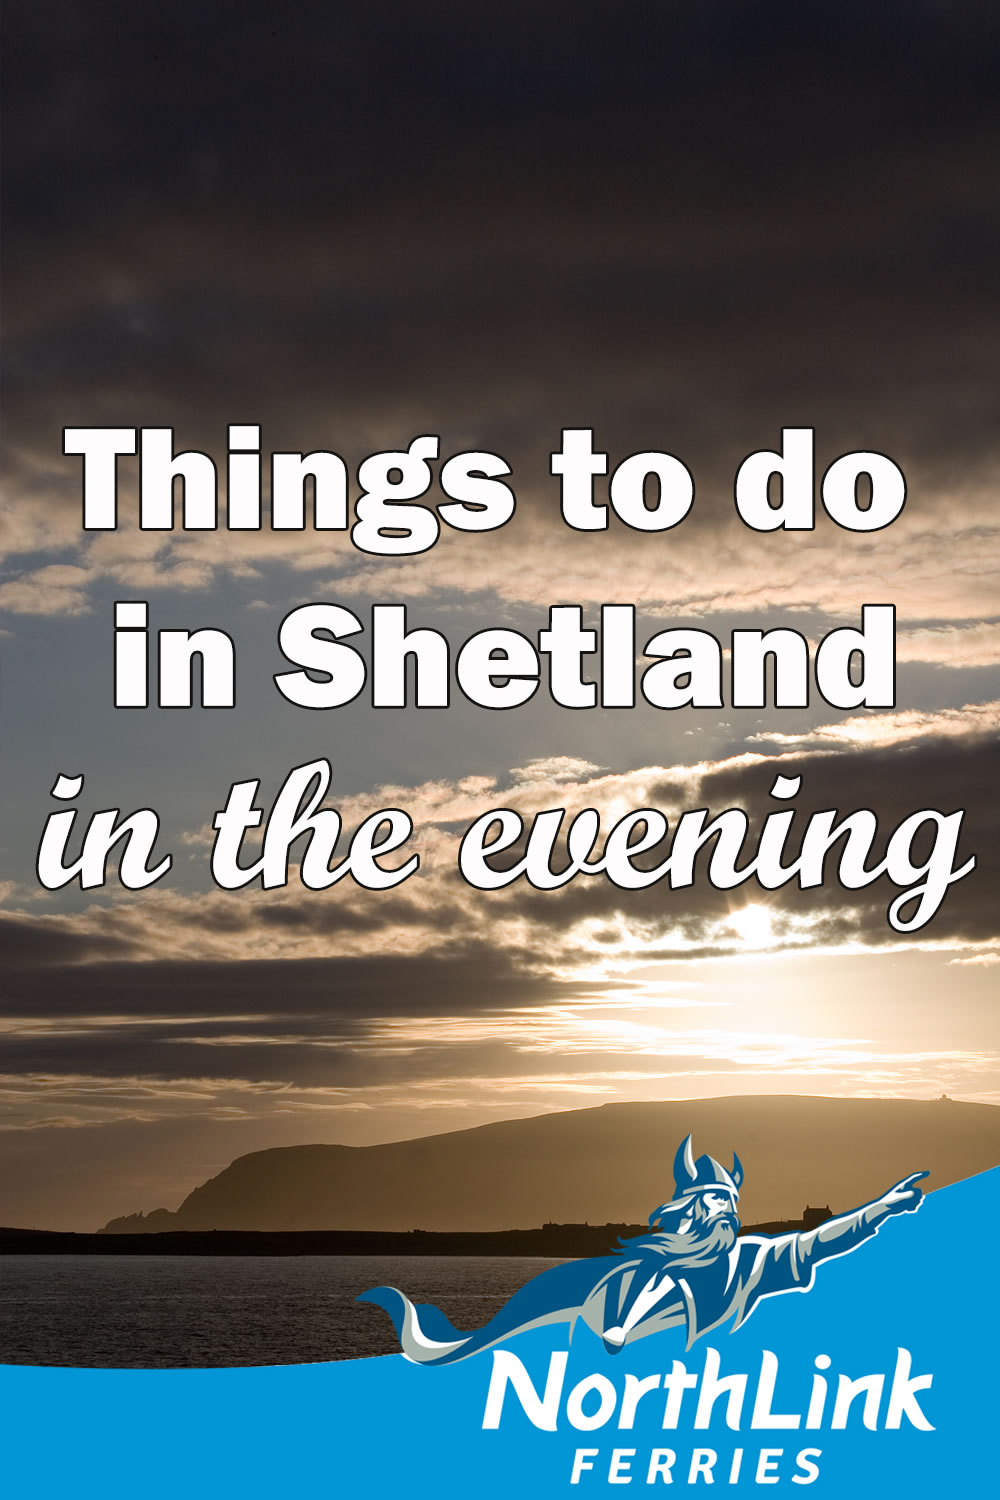 Things to do in Shetland in the evening